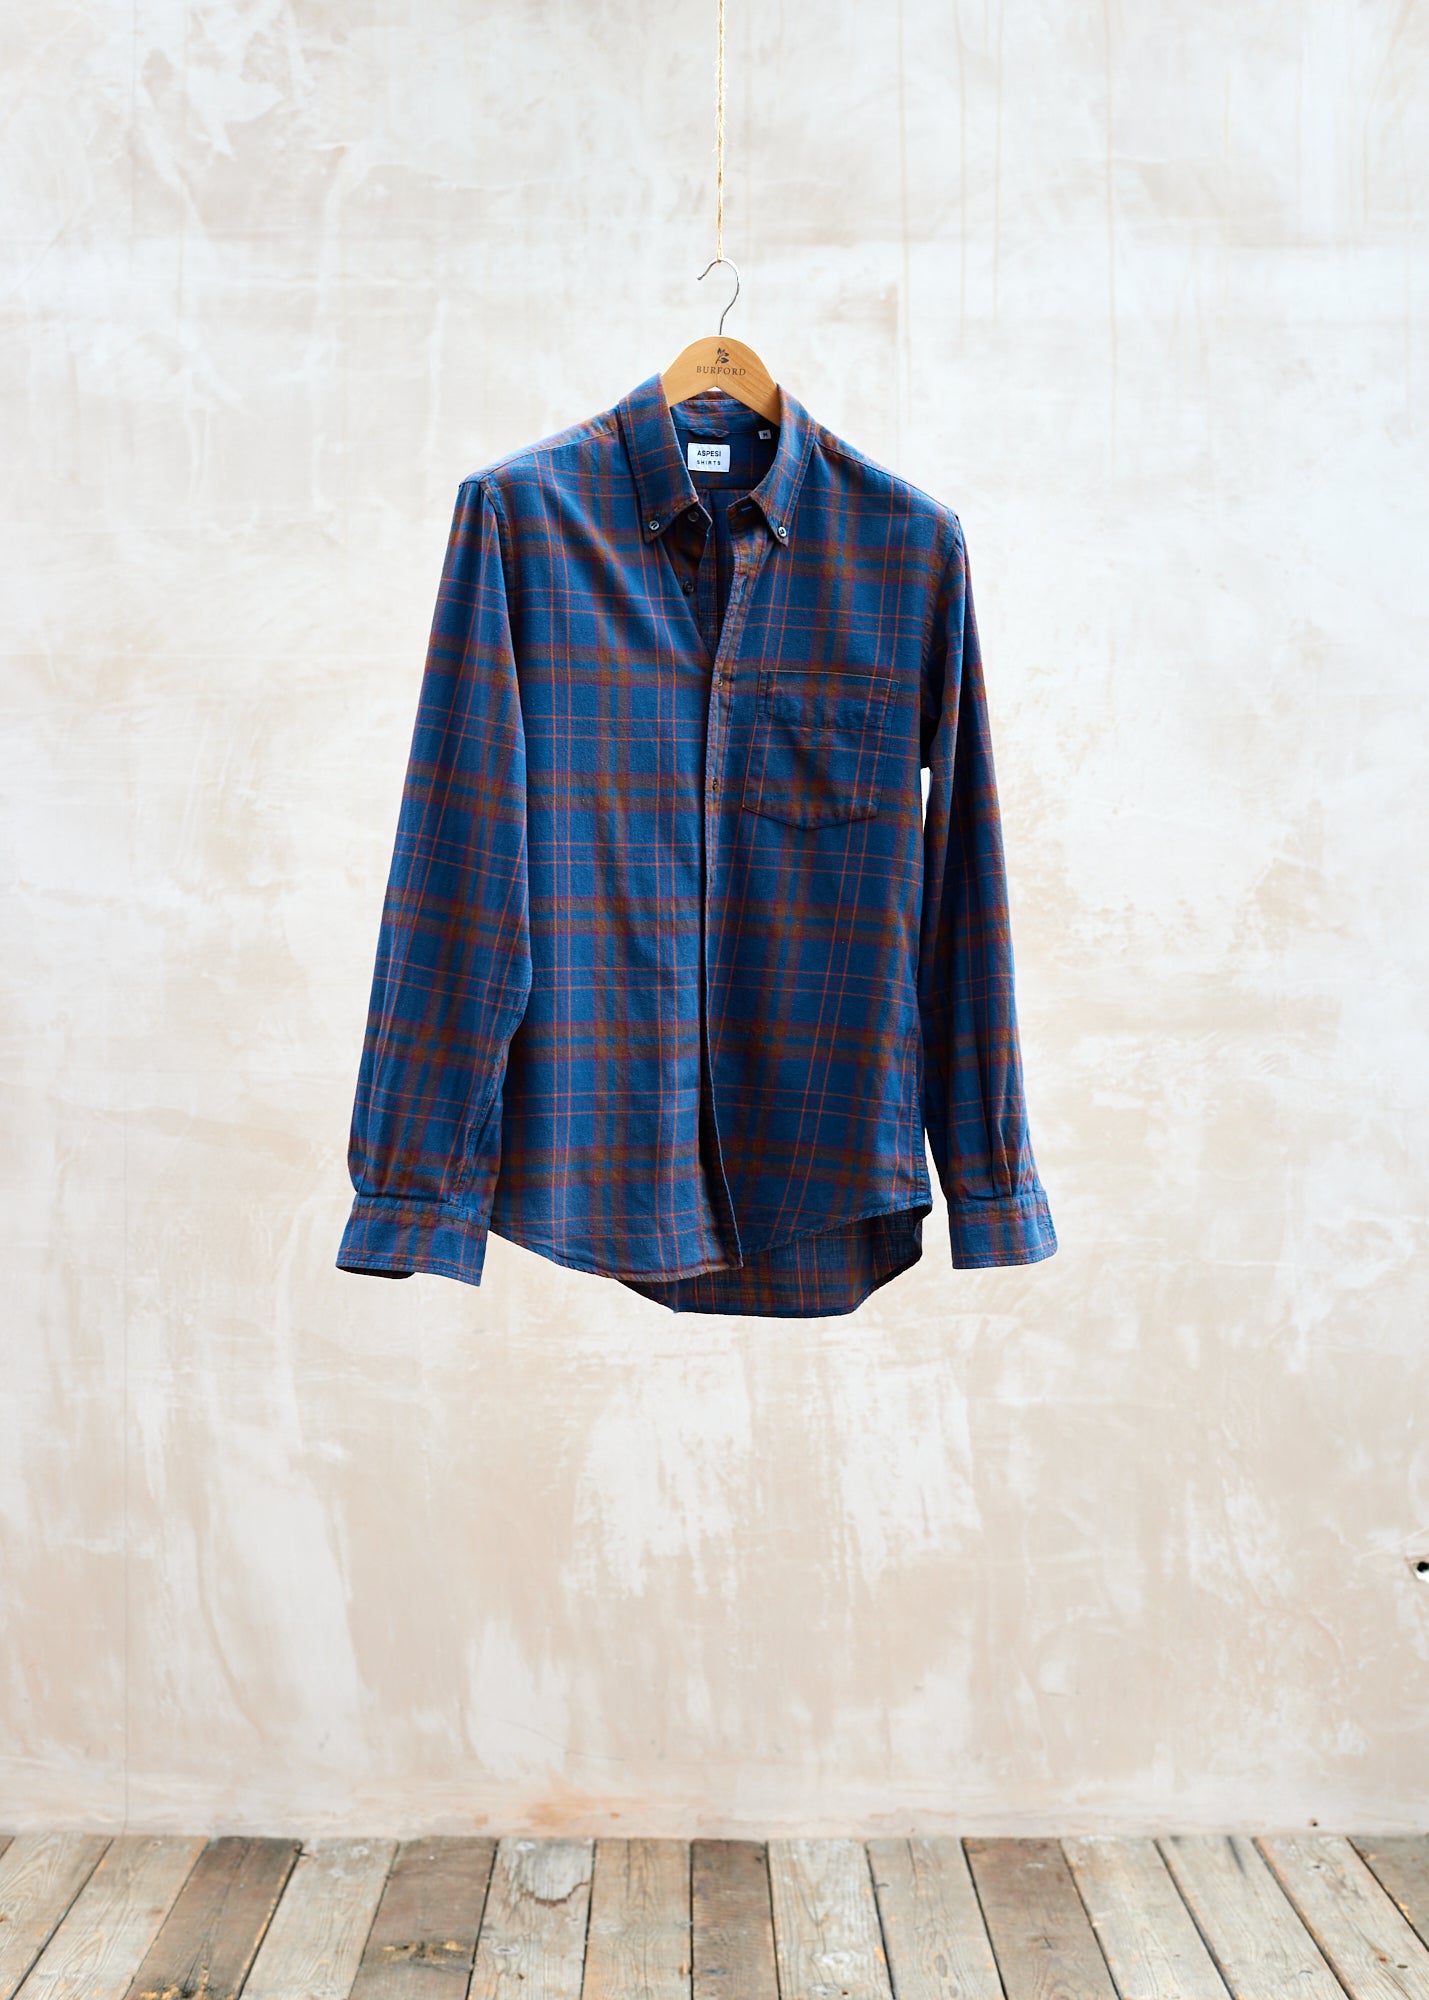 Aspesi Navy & Red Checked Cotton Flannel Shirt